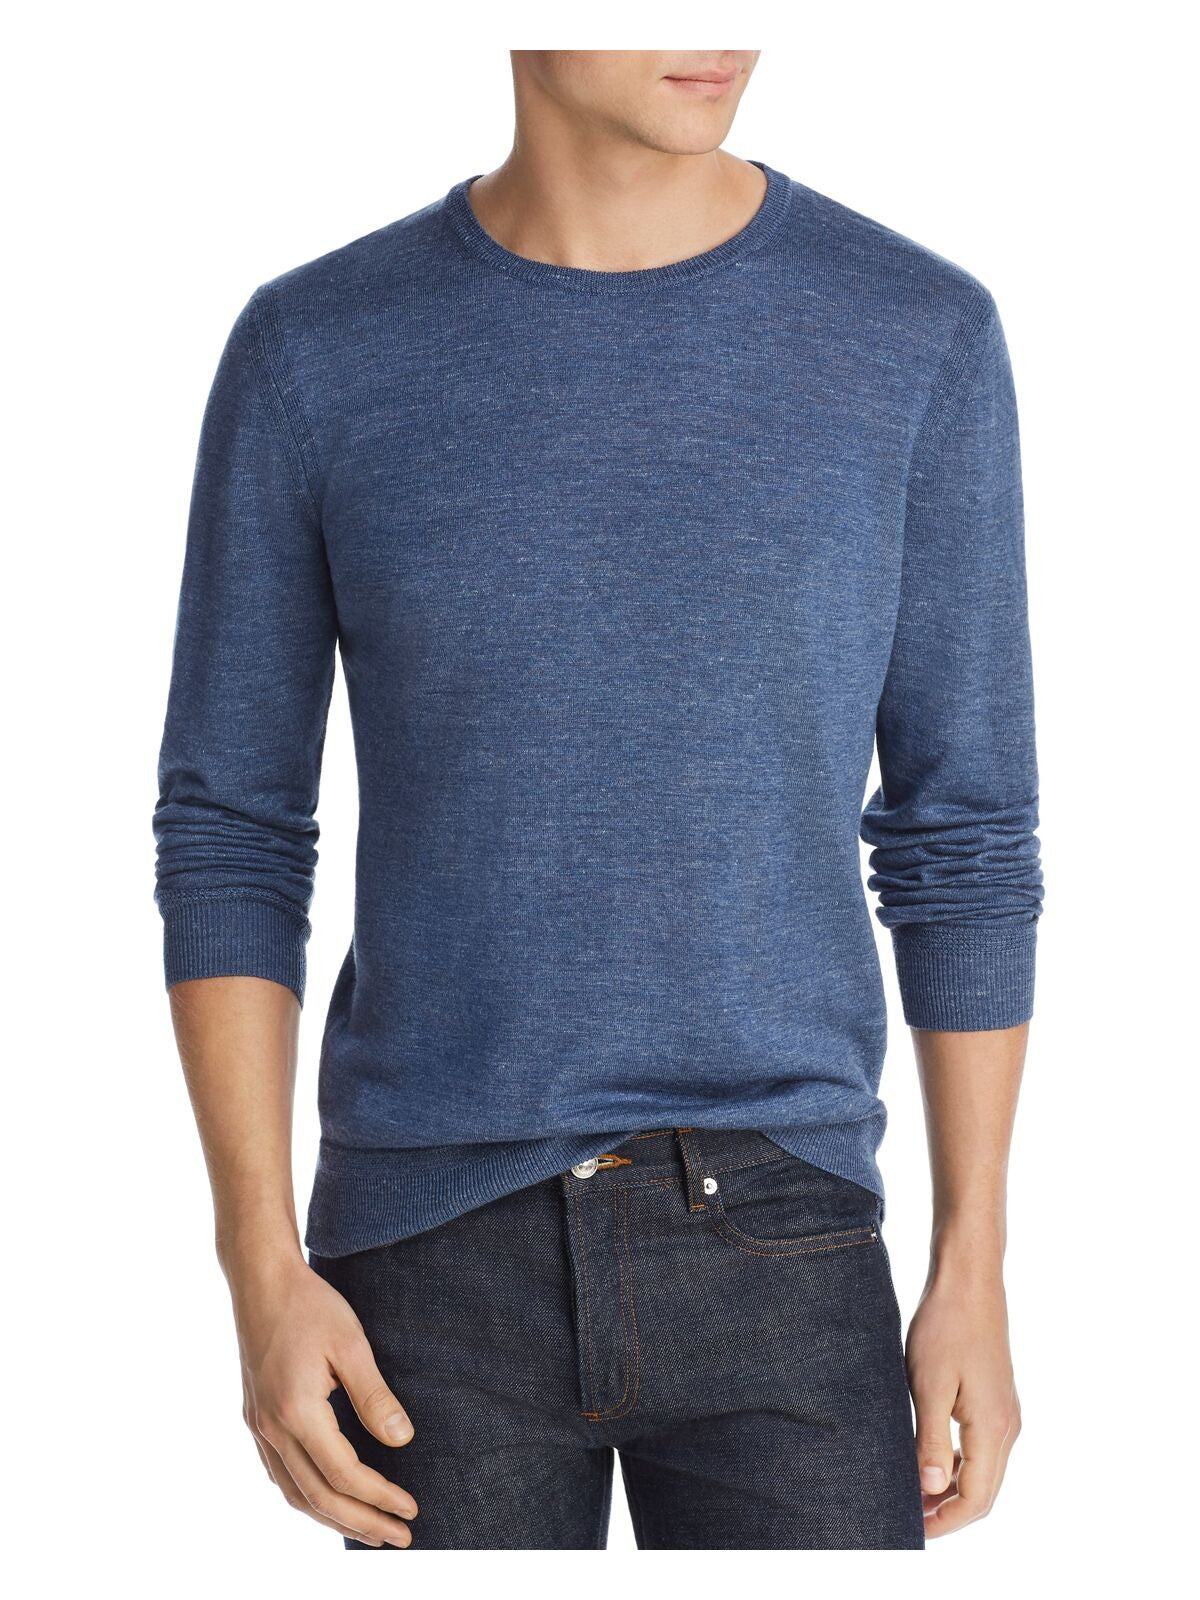 The Mens store Mens Blue Heather Long Sleeve Crew Neck Pullover Sweater XXL